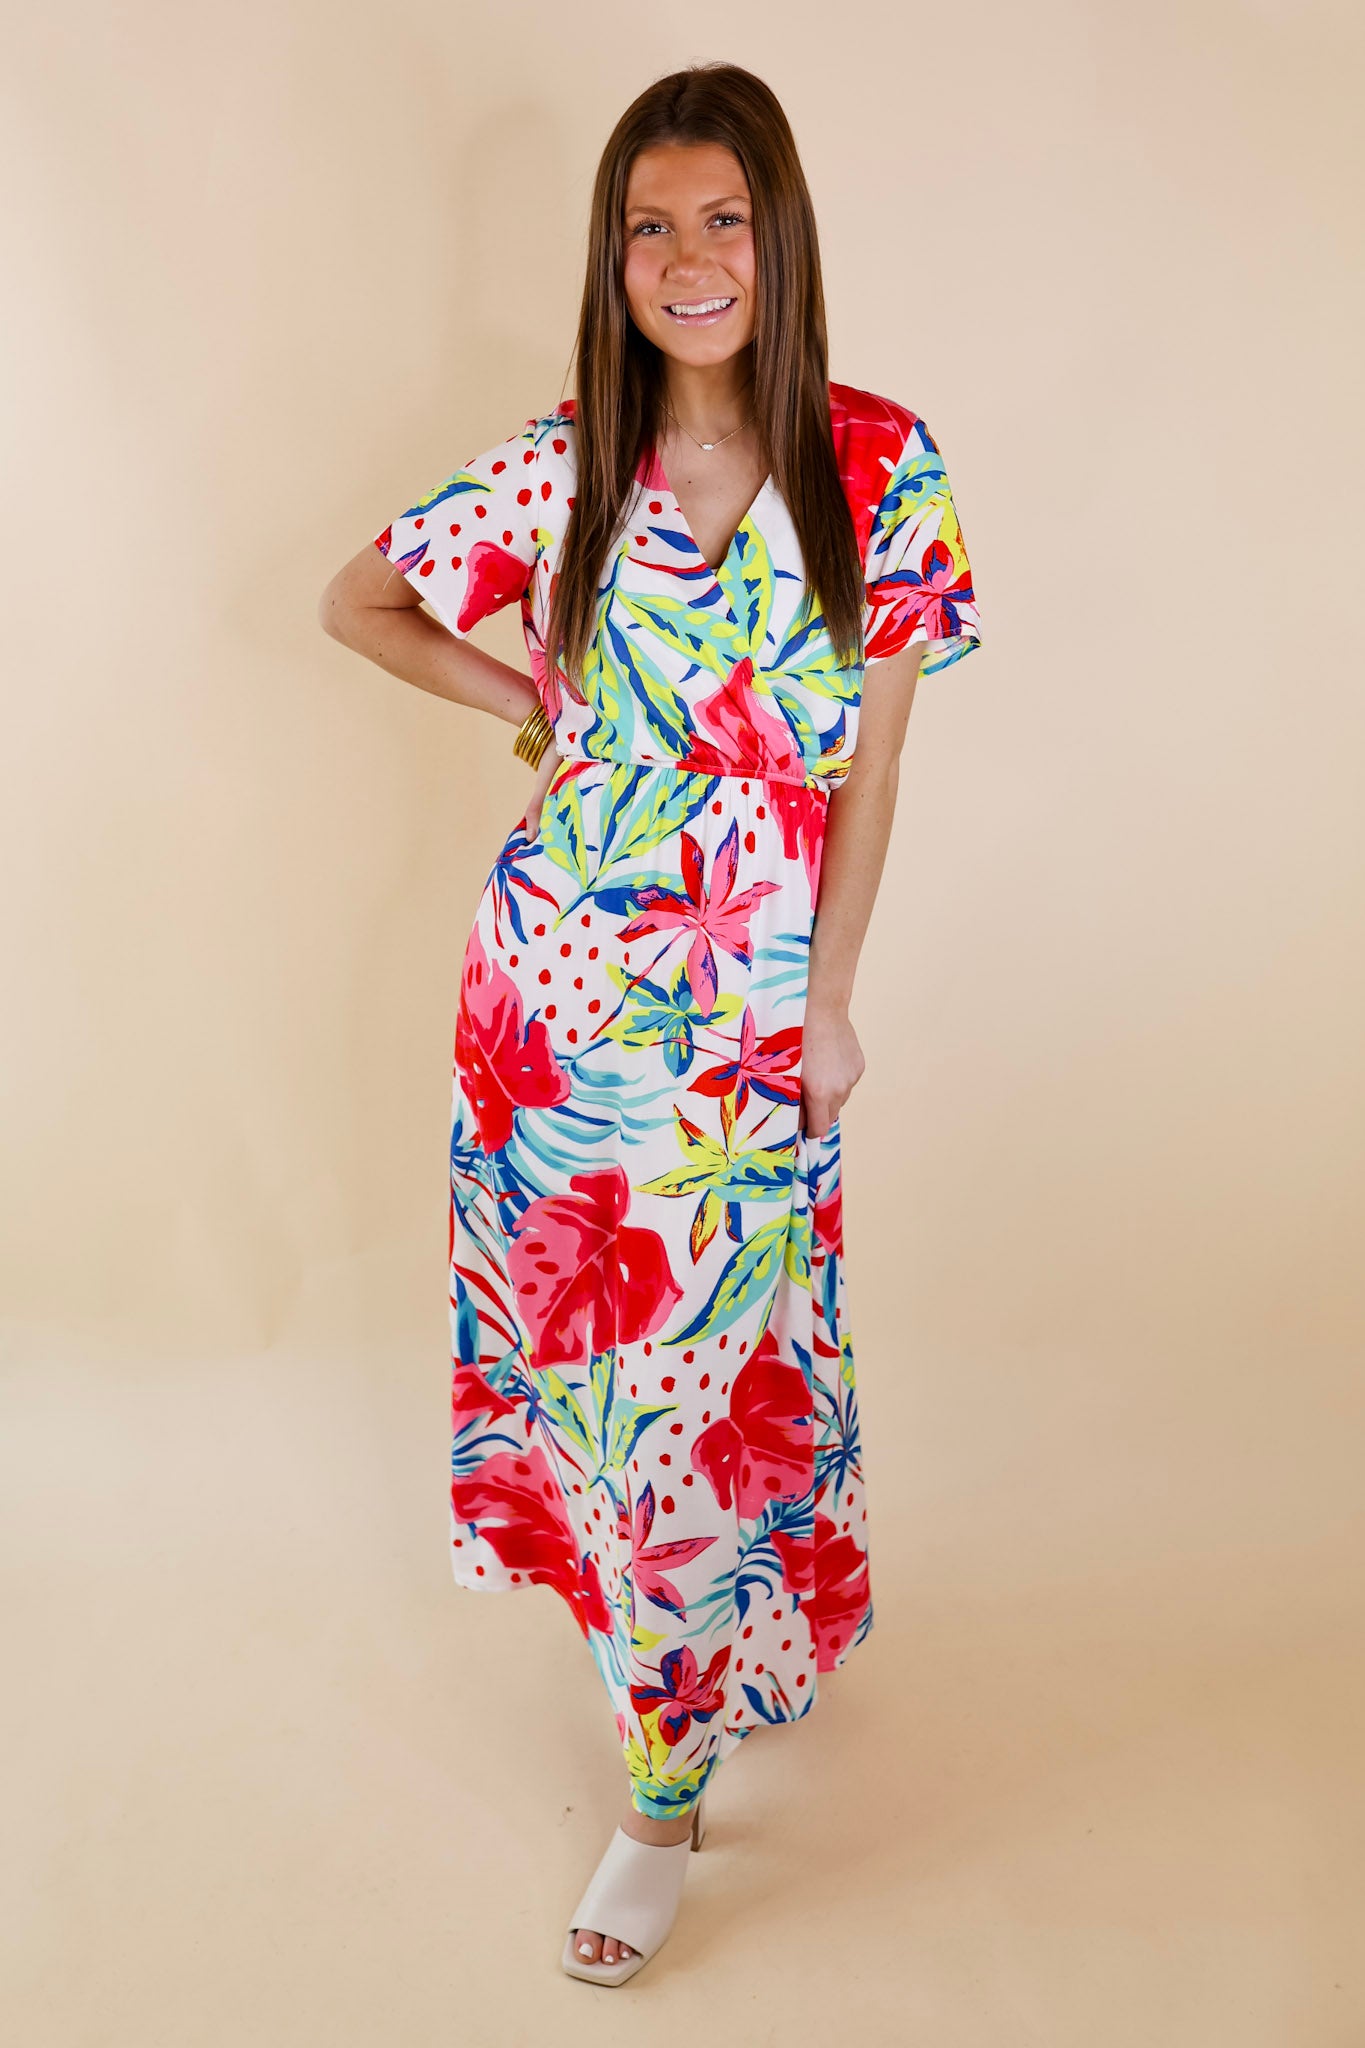 Delightful Dip Tropical Floral Maxi Dress with Waist Tie in White - Giddy Up Glamour Boutique